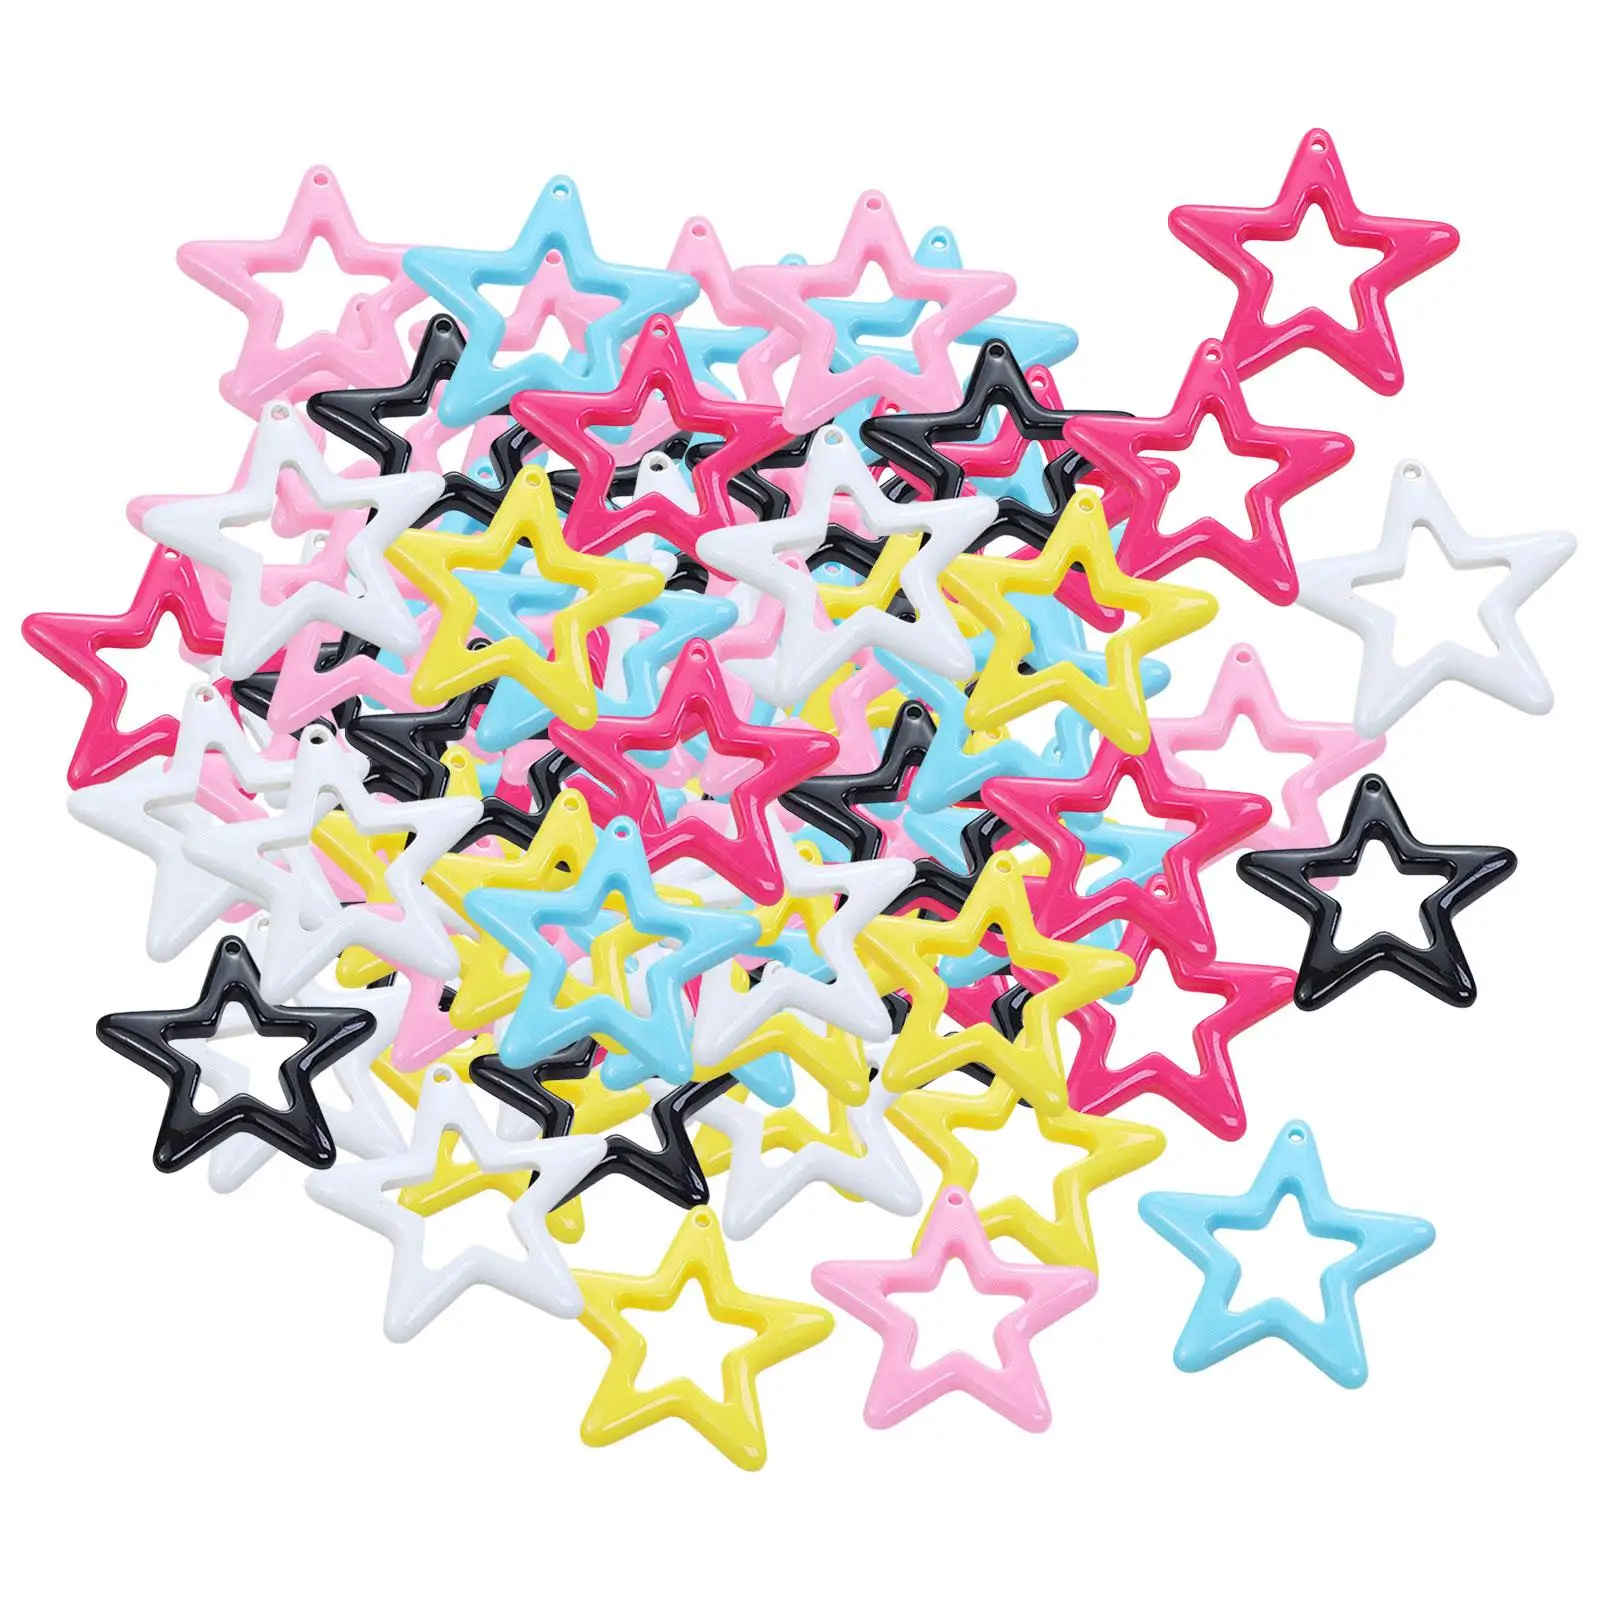 Hollow Star Spacer Bead Bright Hair Accessory Sweet Five Pointed Star Hollow Cell Phone Keychain for Jewelry Making Bracelet